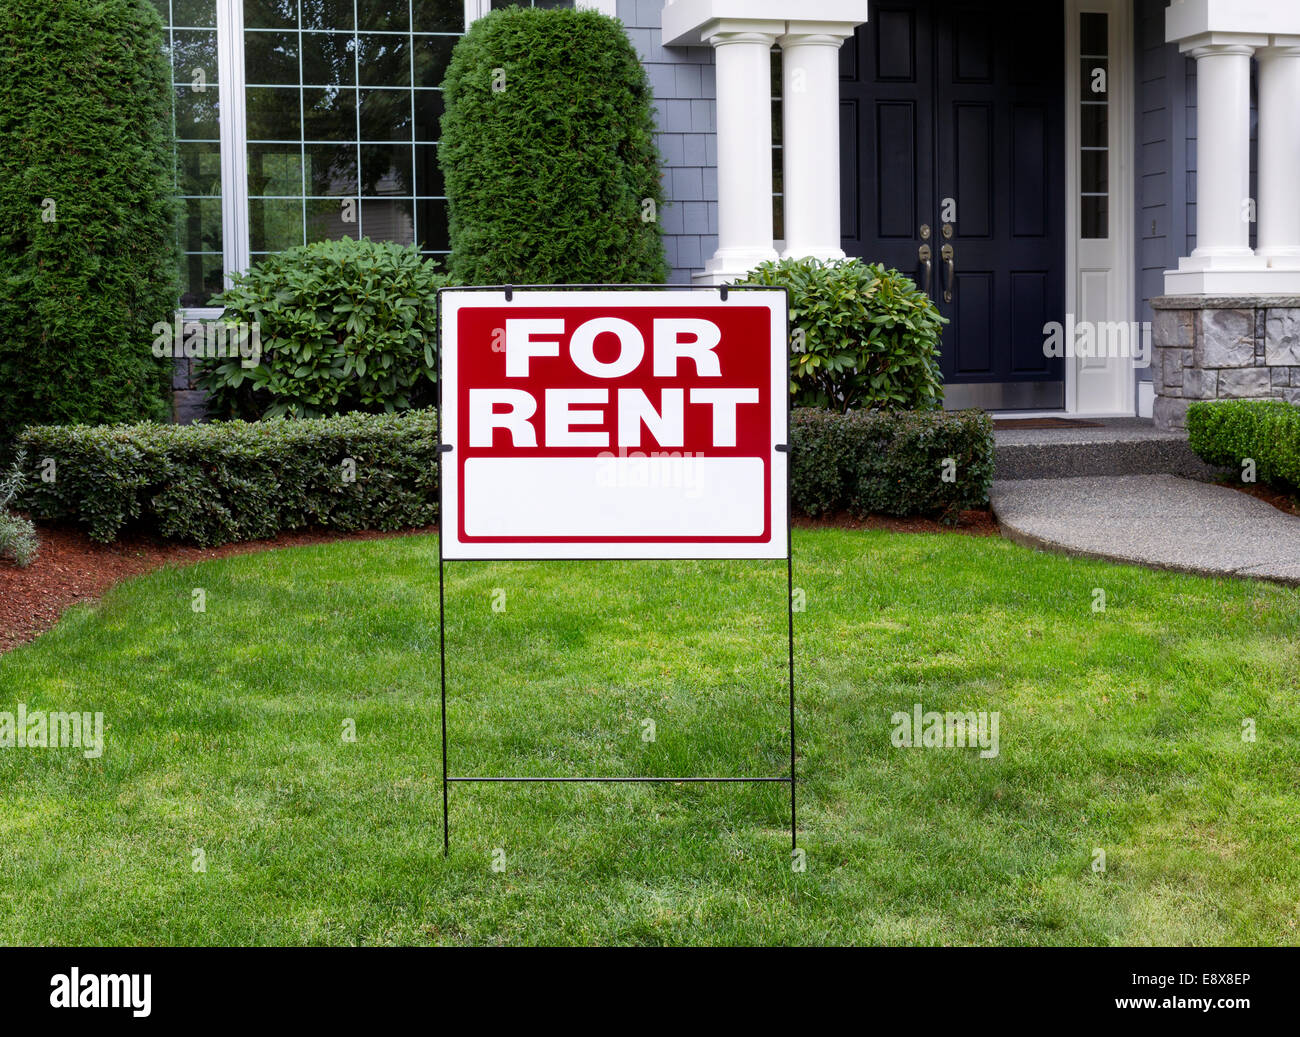 Closeup view of Modern Suburban Home with for Rent Sign in front Yard Stock Photo